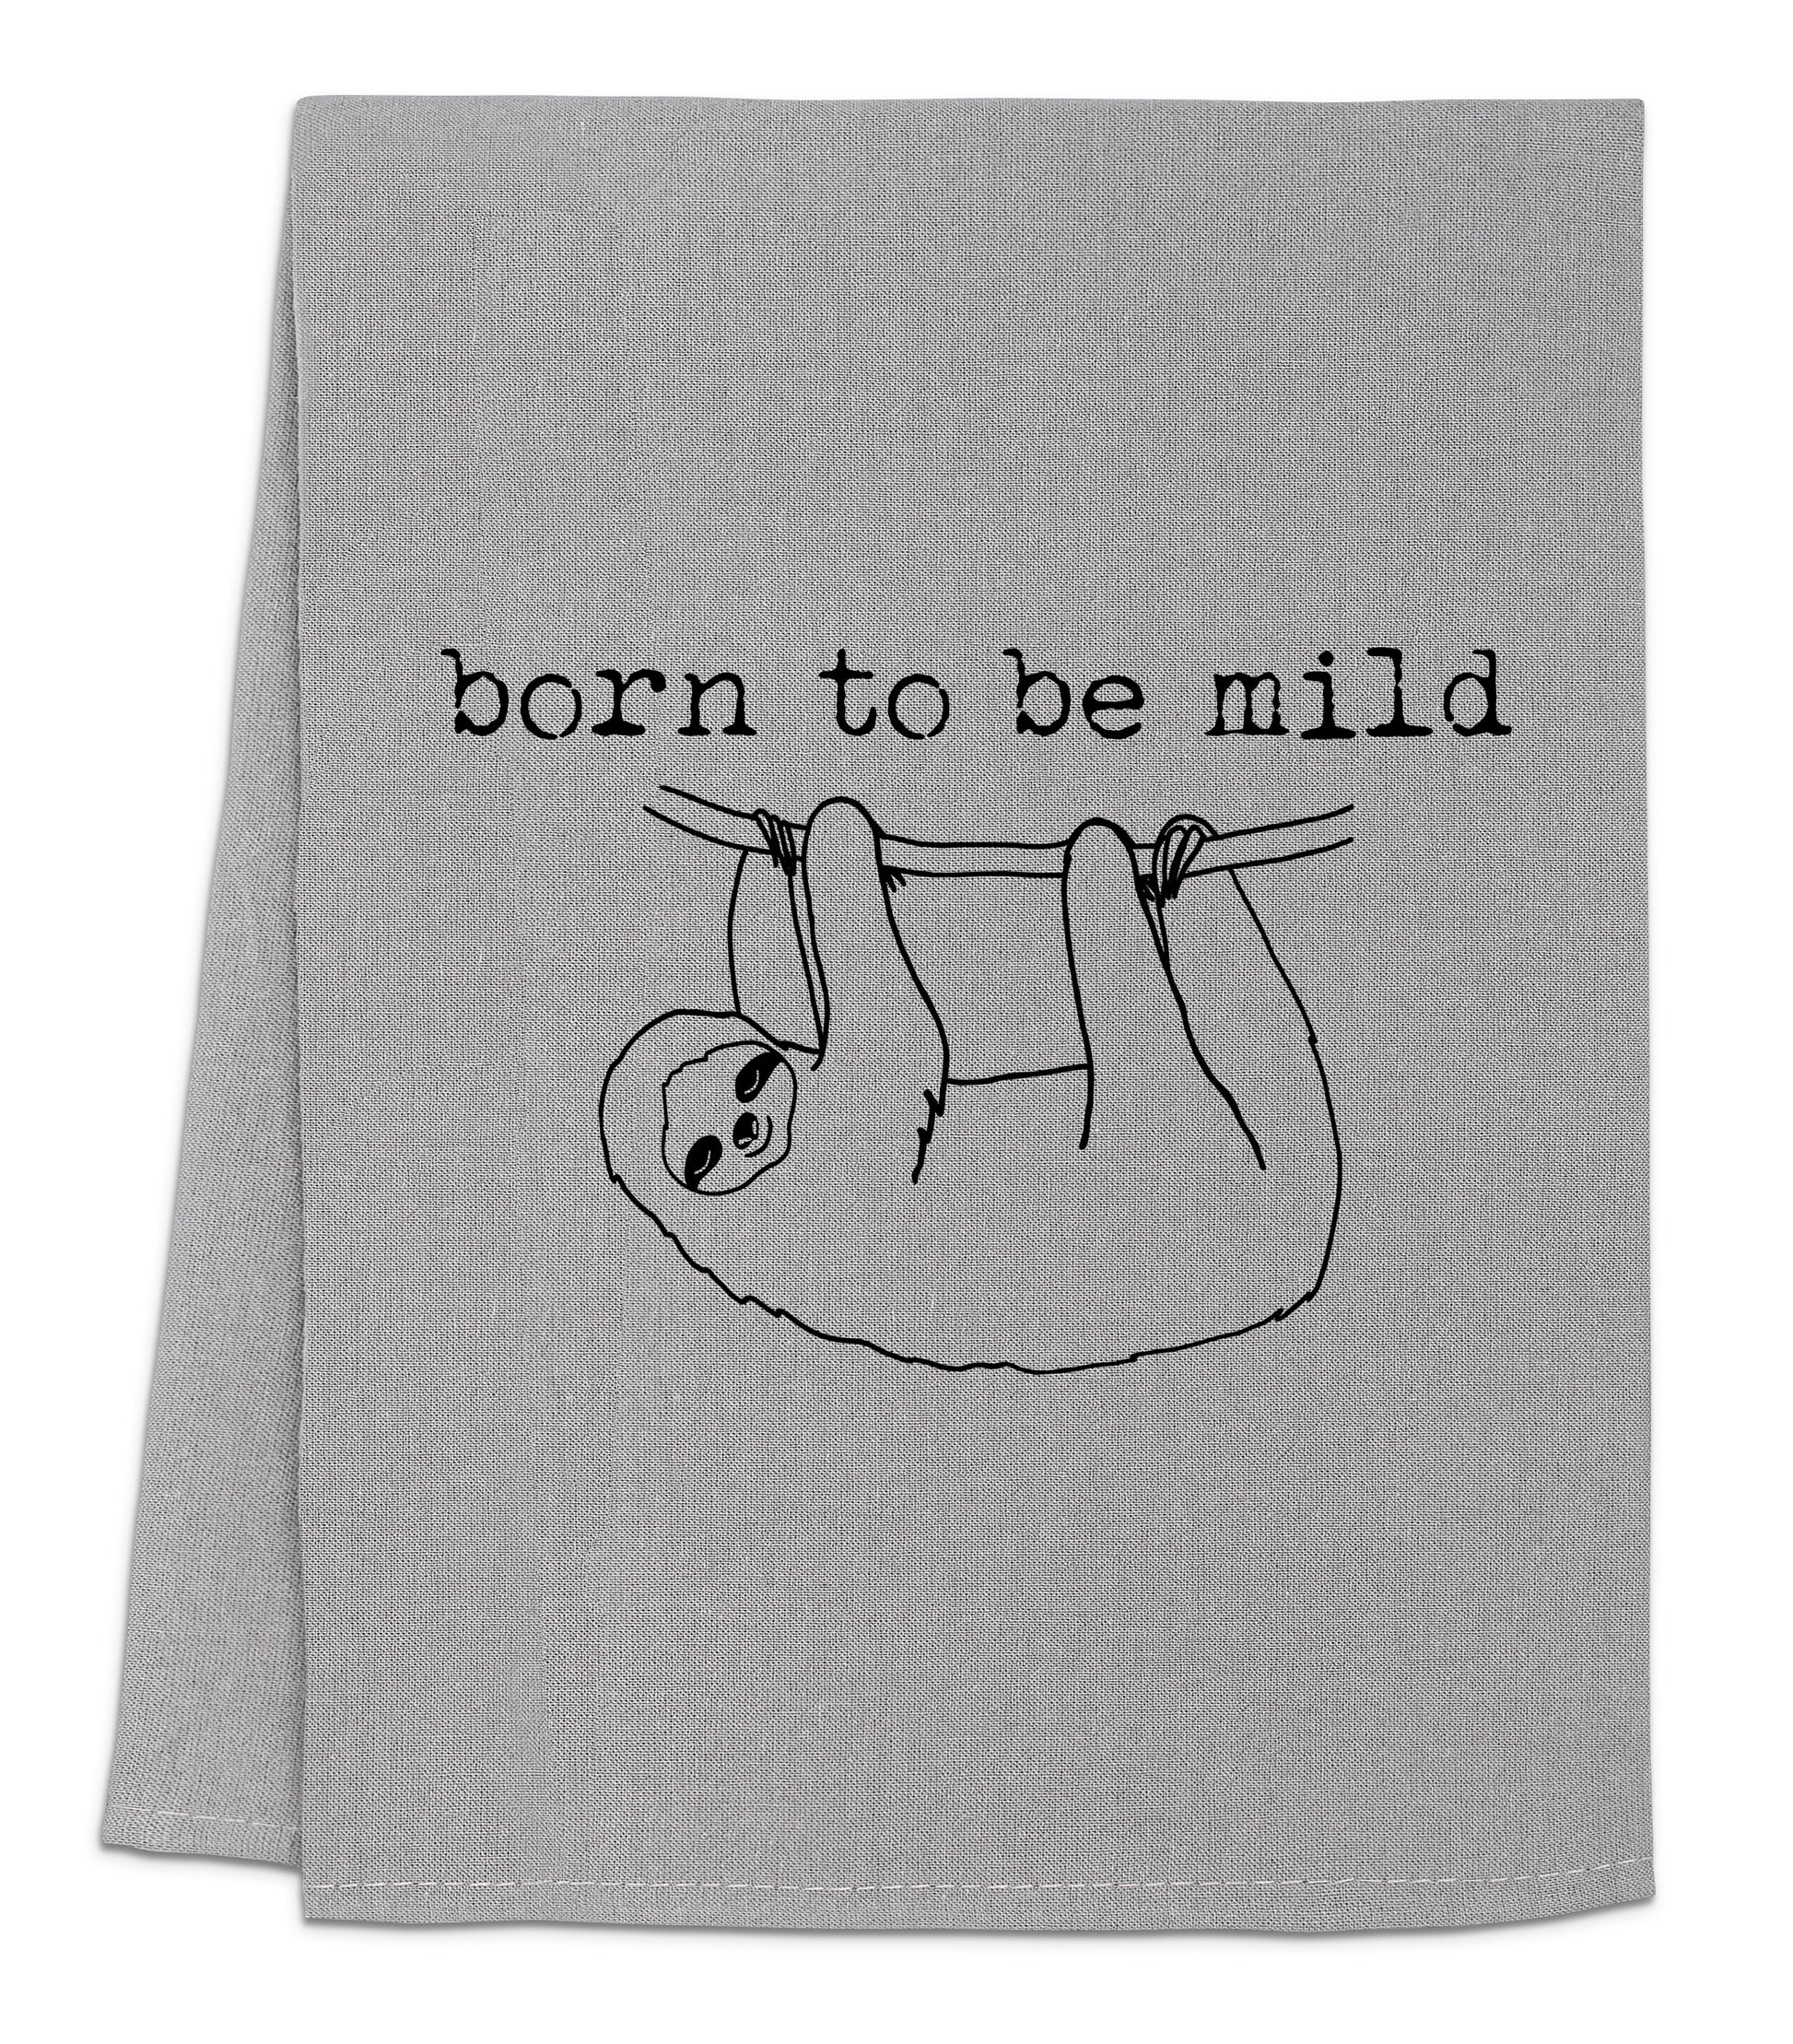 a towel with a slot on it that says, born to be mild